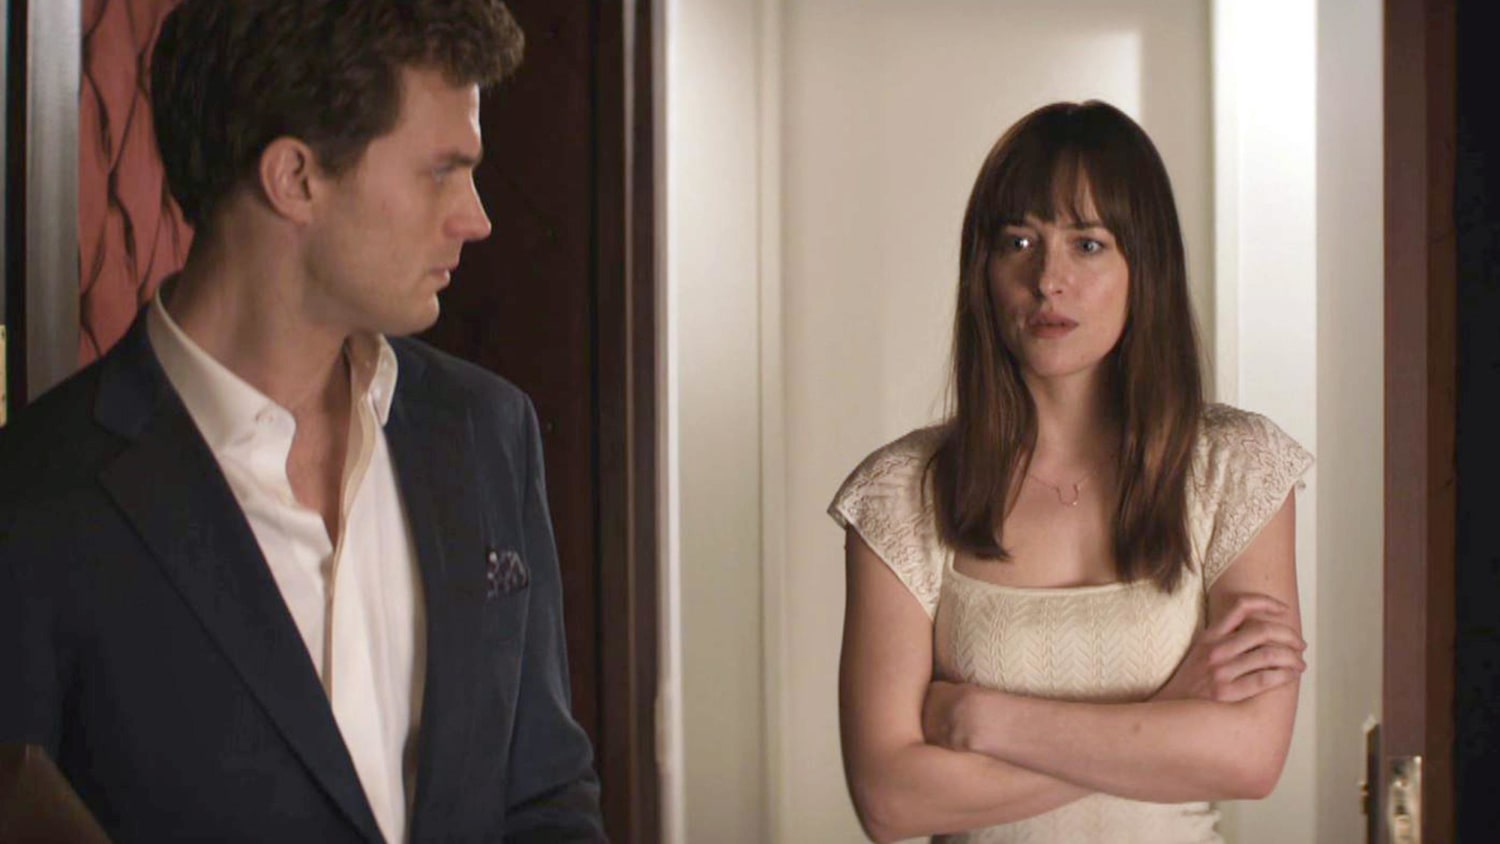 s exclusive clips from the upcoming "Fifty Shades of Grey"...